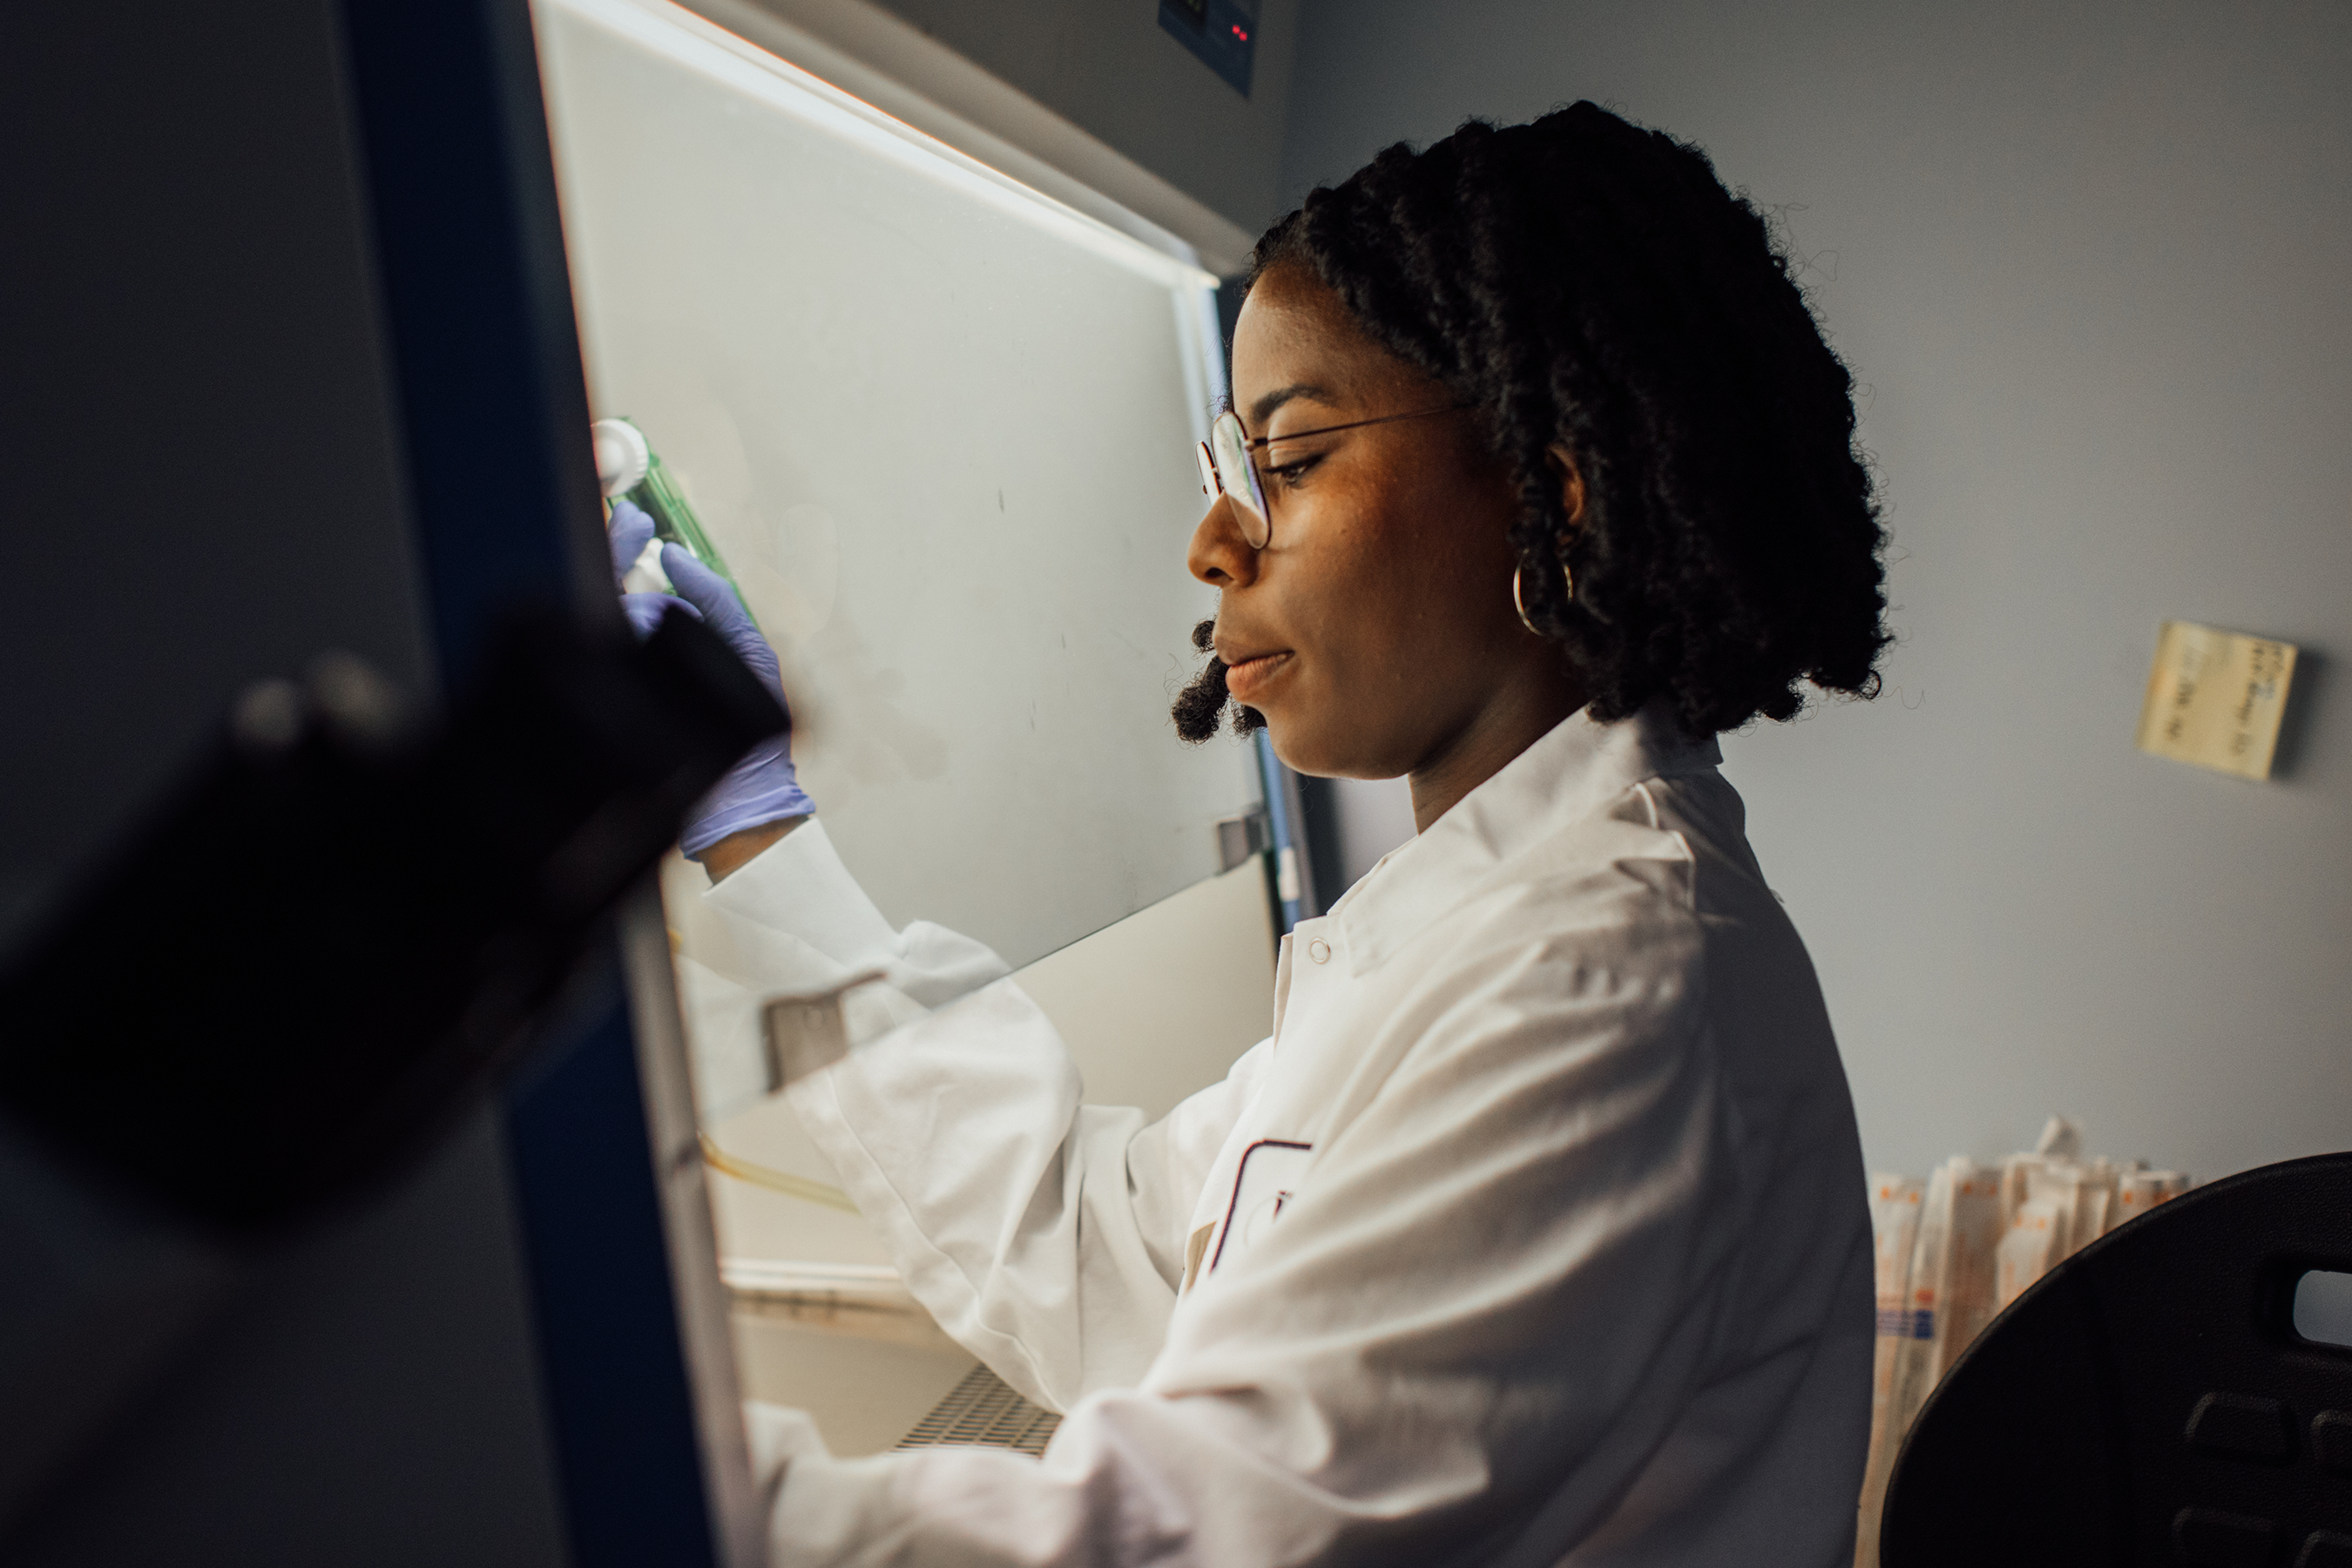 Dr. Yewande working in the lab